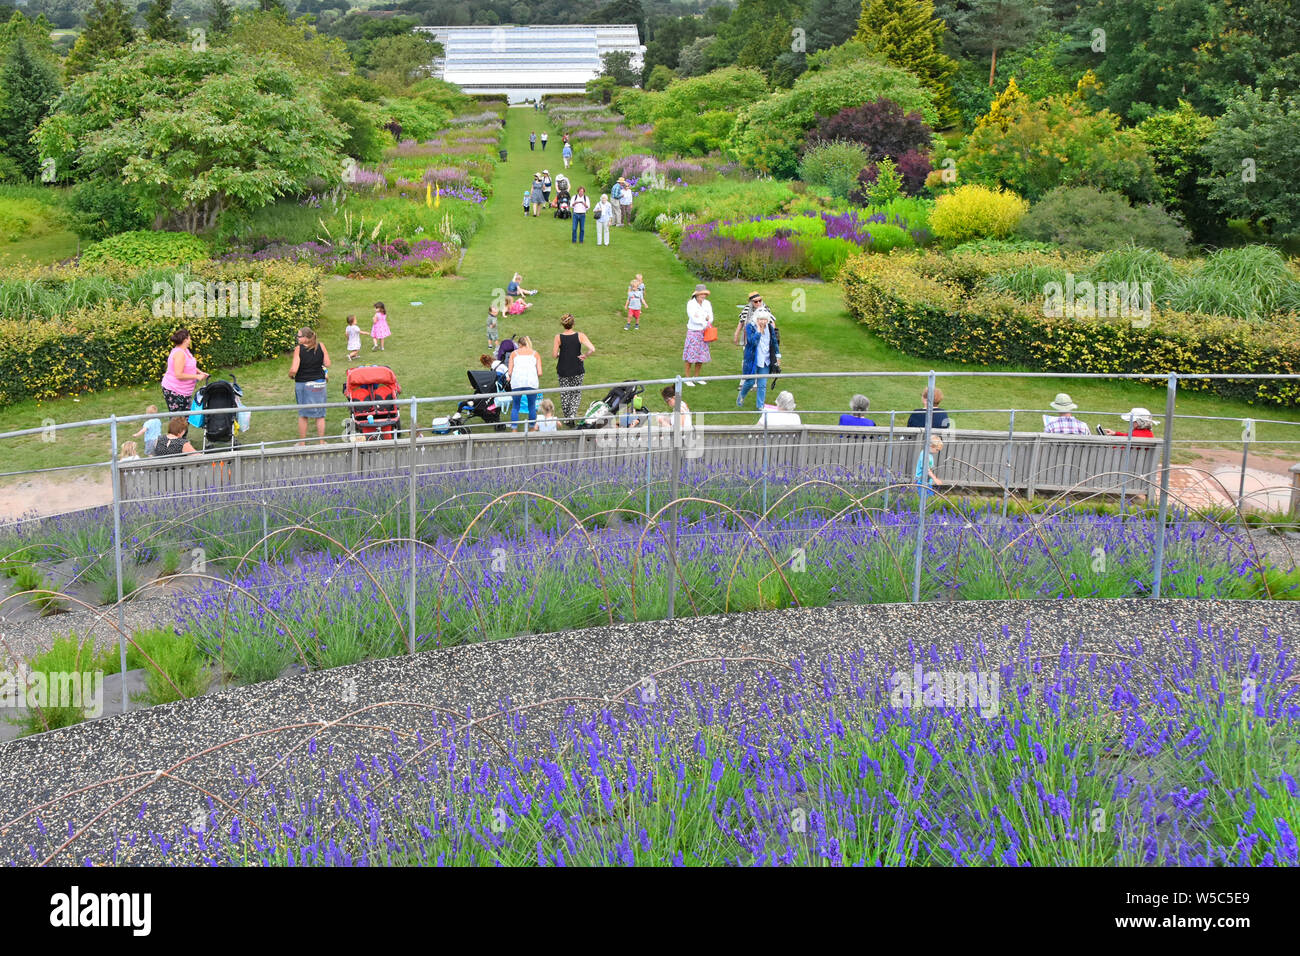 Rhs Wisley Garden Viewing Mount New Planting Of Two Species Of Lavender Rosemary Visitors Enjoy Views Walk To New Glasshouses Surrey England Uk Stock Photo Alamy